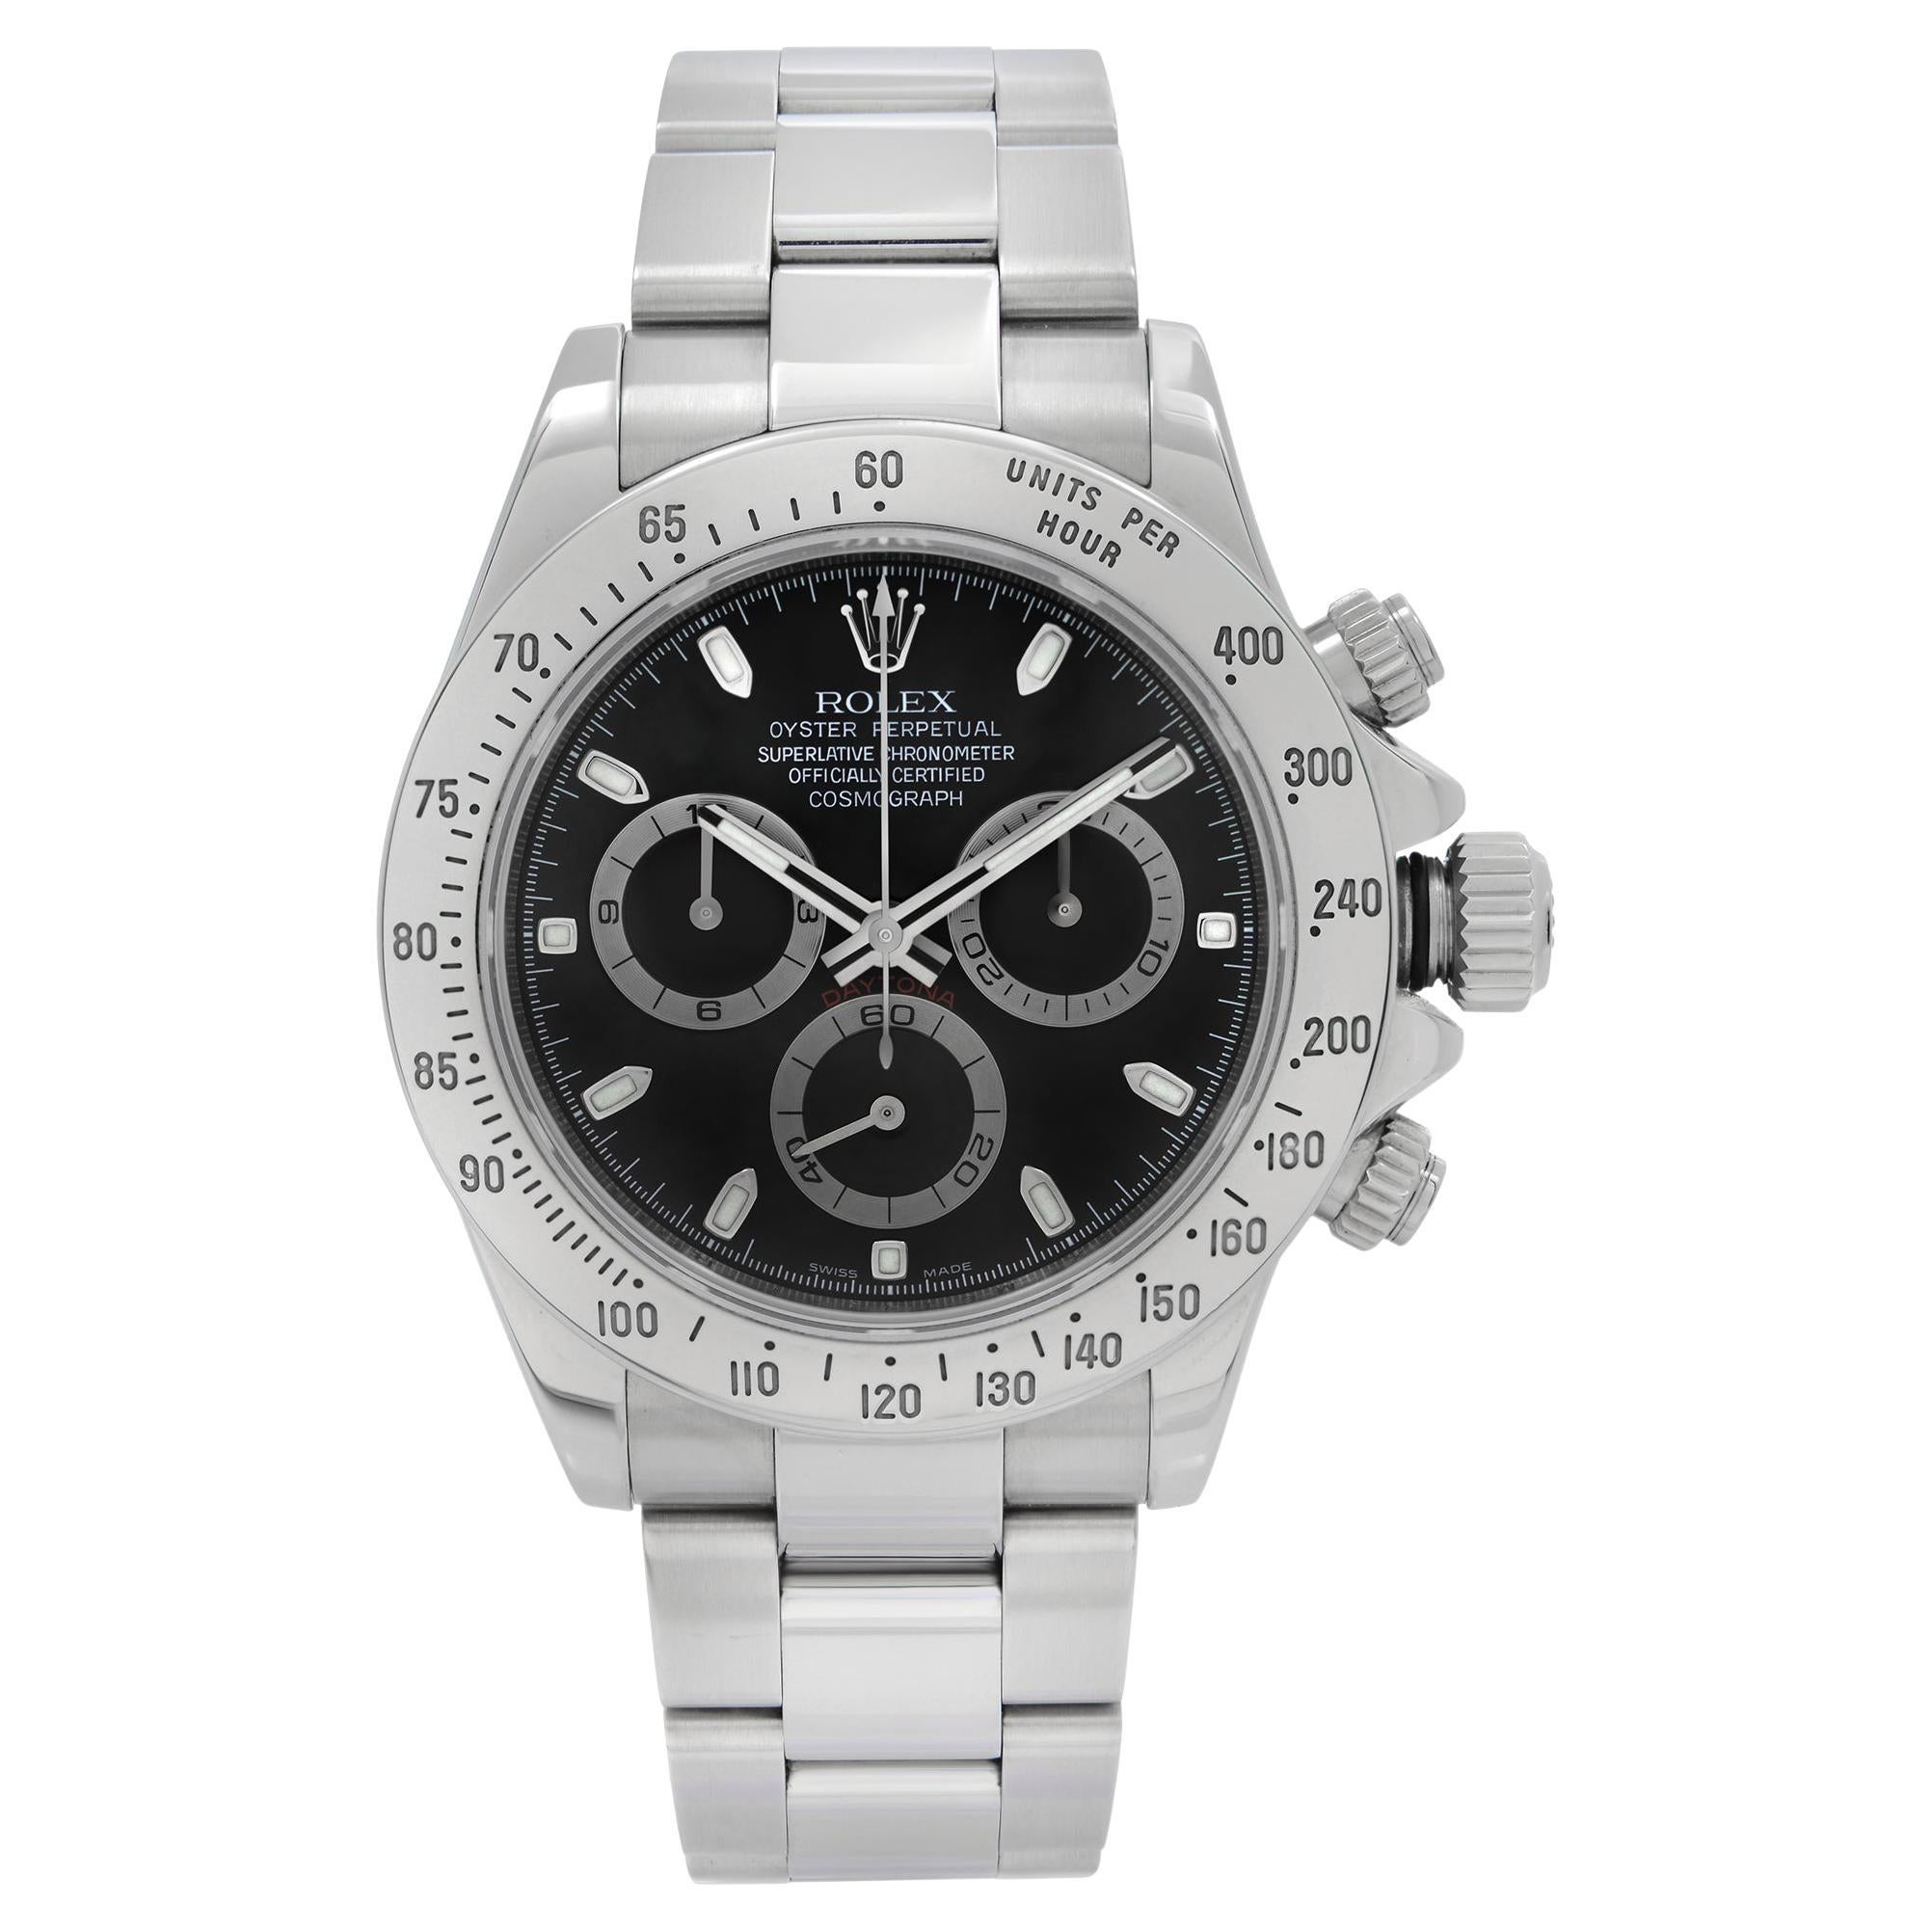 Rolex Daytona Cosmograph Steel Black Index Dial Automatic Mens Watch 116520